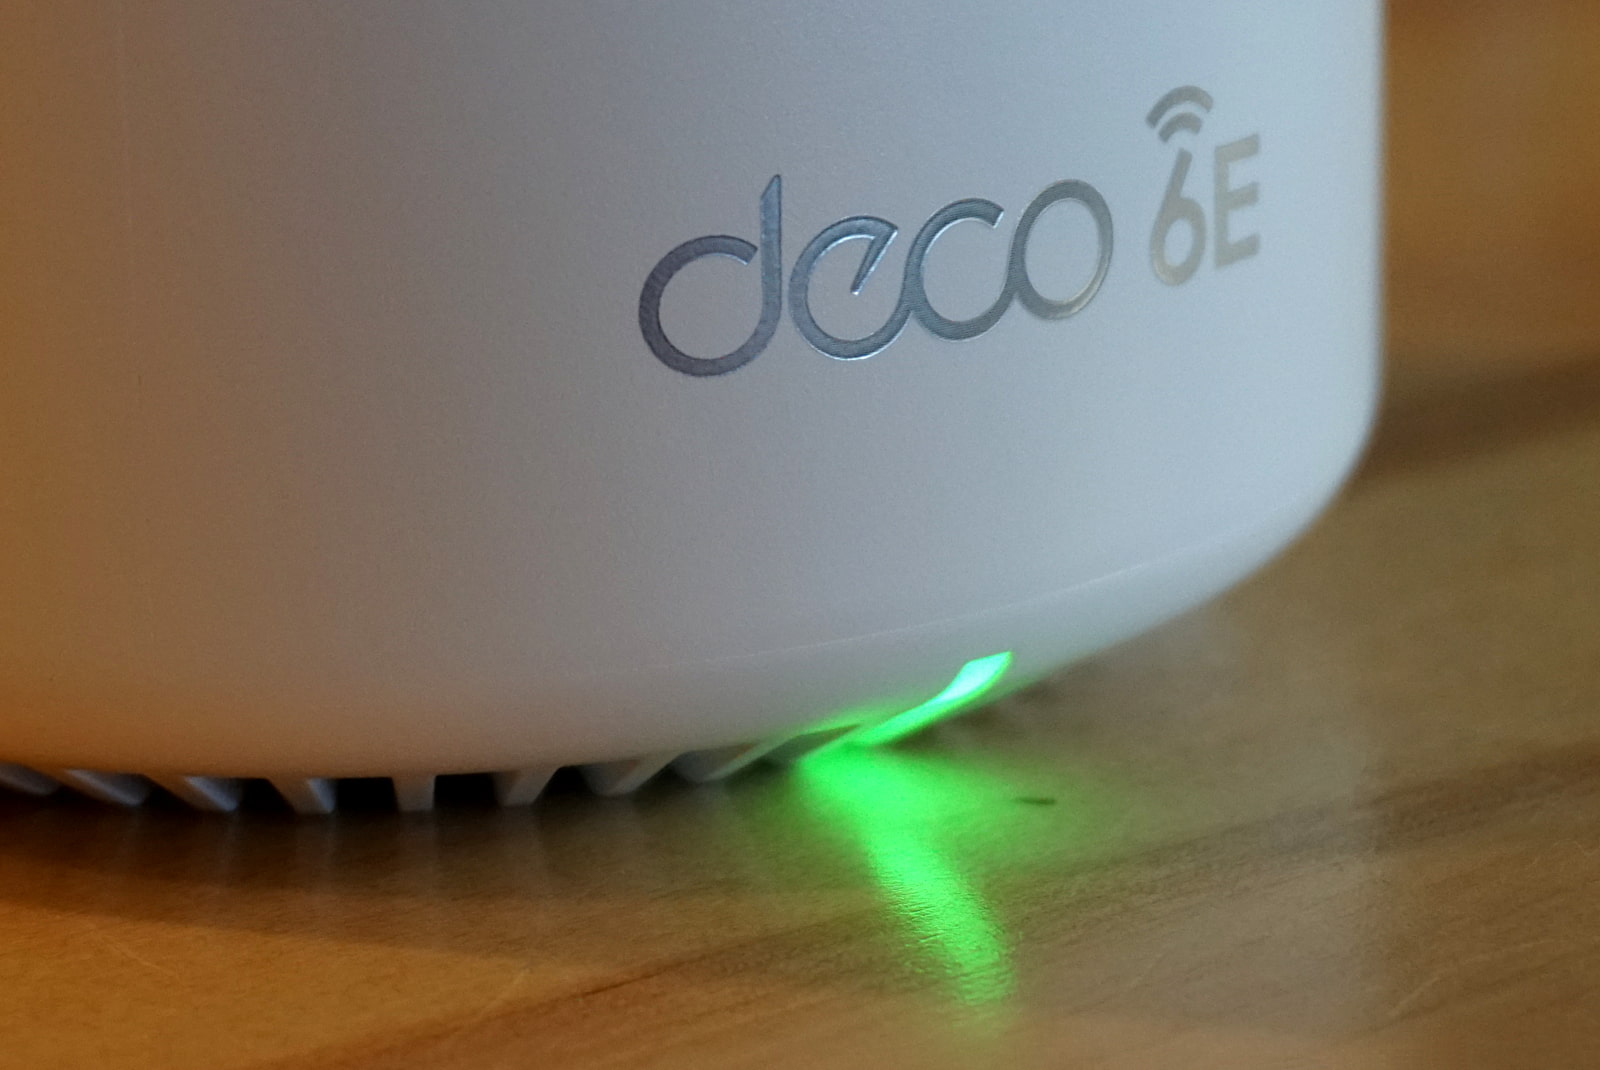 TP Link Deco XE75 Pro WiFi 6E Review  Unboxing, Speed Test, Range Tests,  Deco App and Much More  